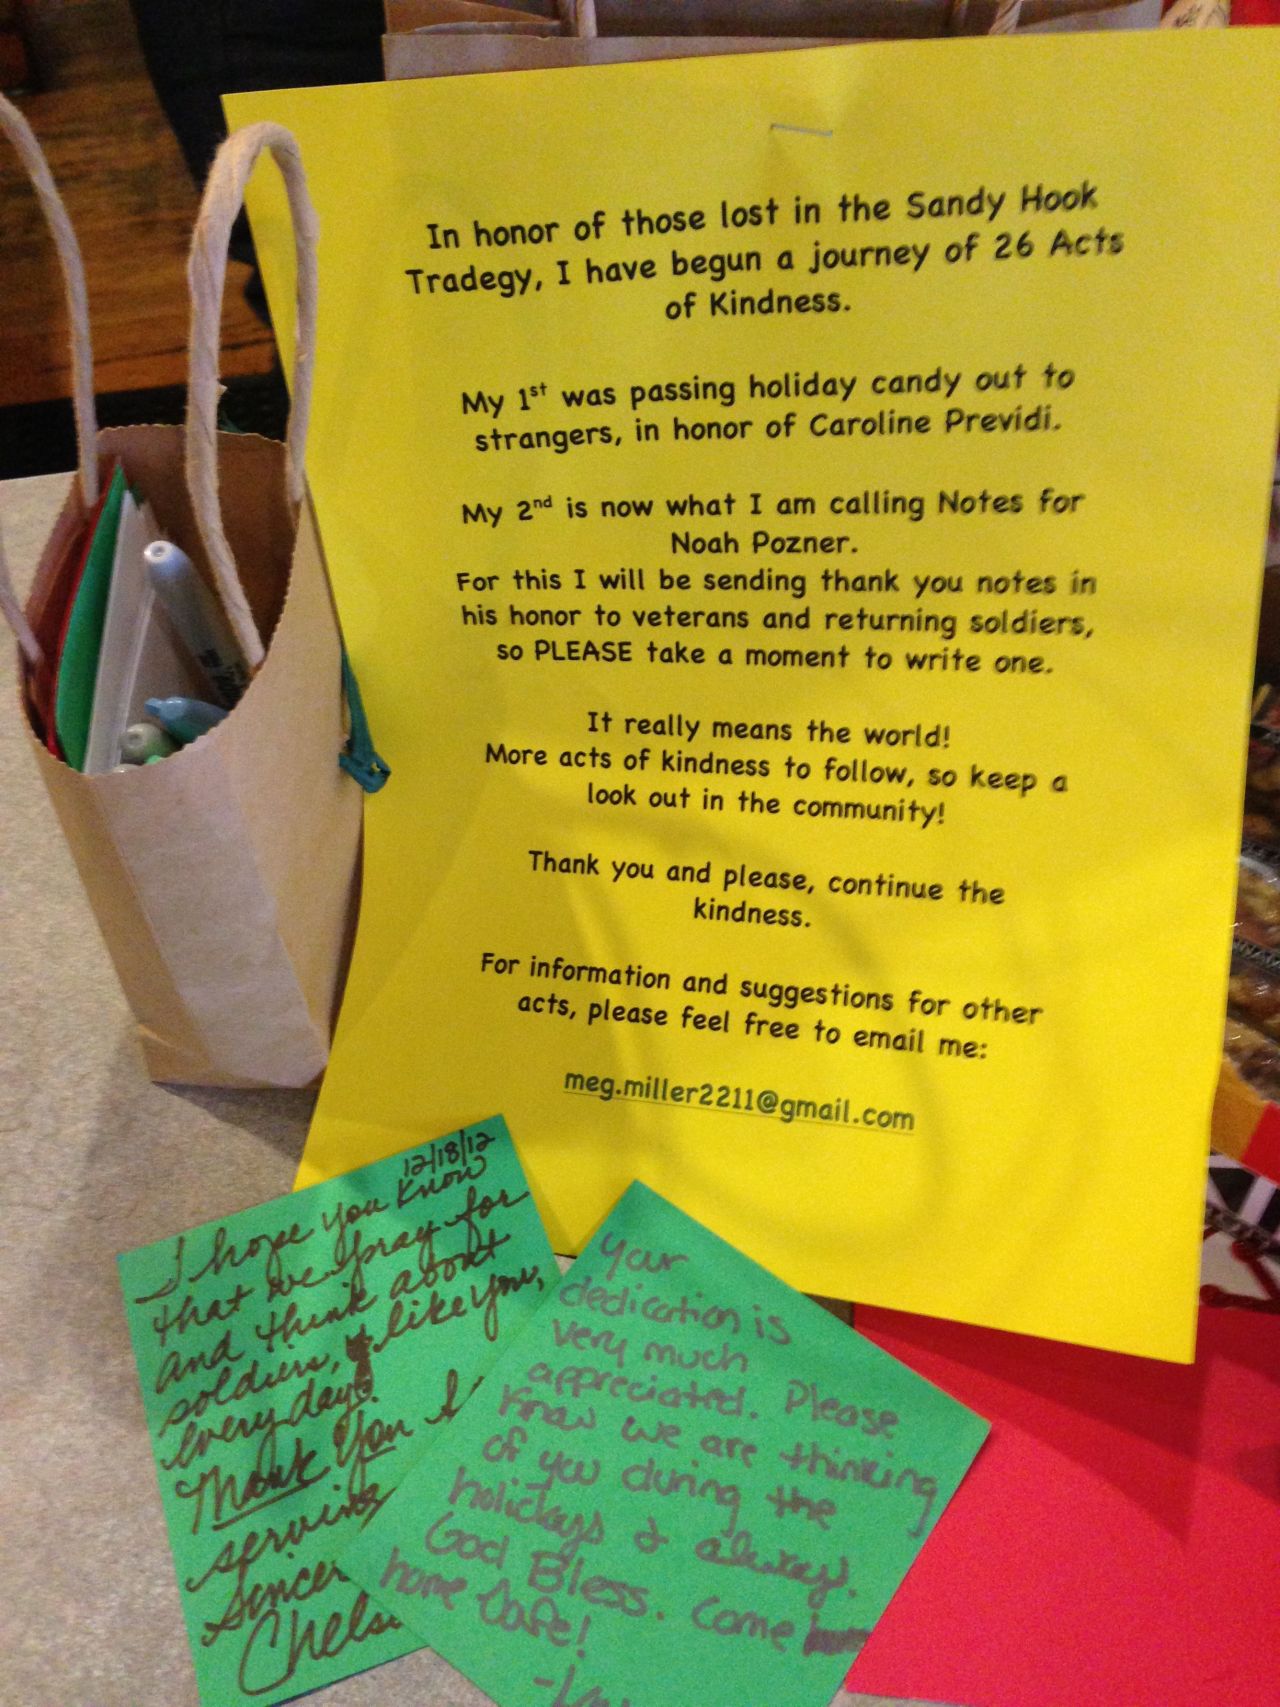 Megan Miller, a nanny in Alexandria, Virginia, was inspired by Ann Curry's online campaign to do 26 acts of kindness for each of the 20 children and six adults killed at Sandy Hook Elementary School. For her first act, she passed out candy to strangers in honor of Caroline Previdi. For her second, she is collecting thank-you notes for veterans and returning soldiers.